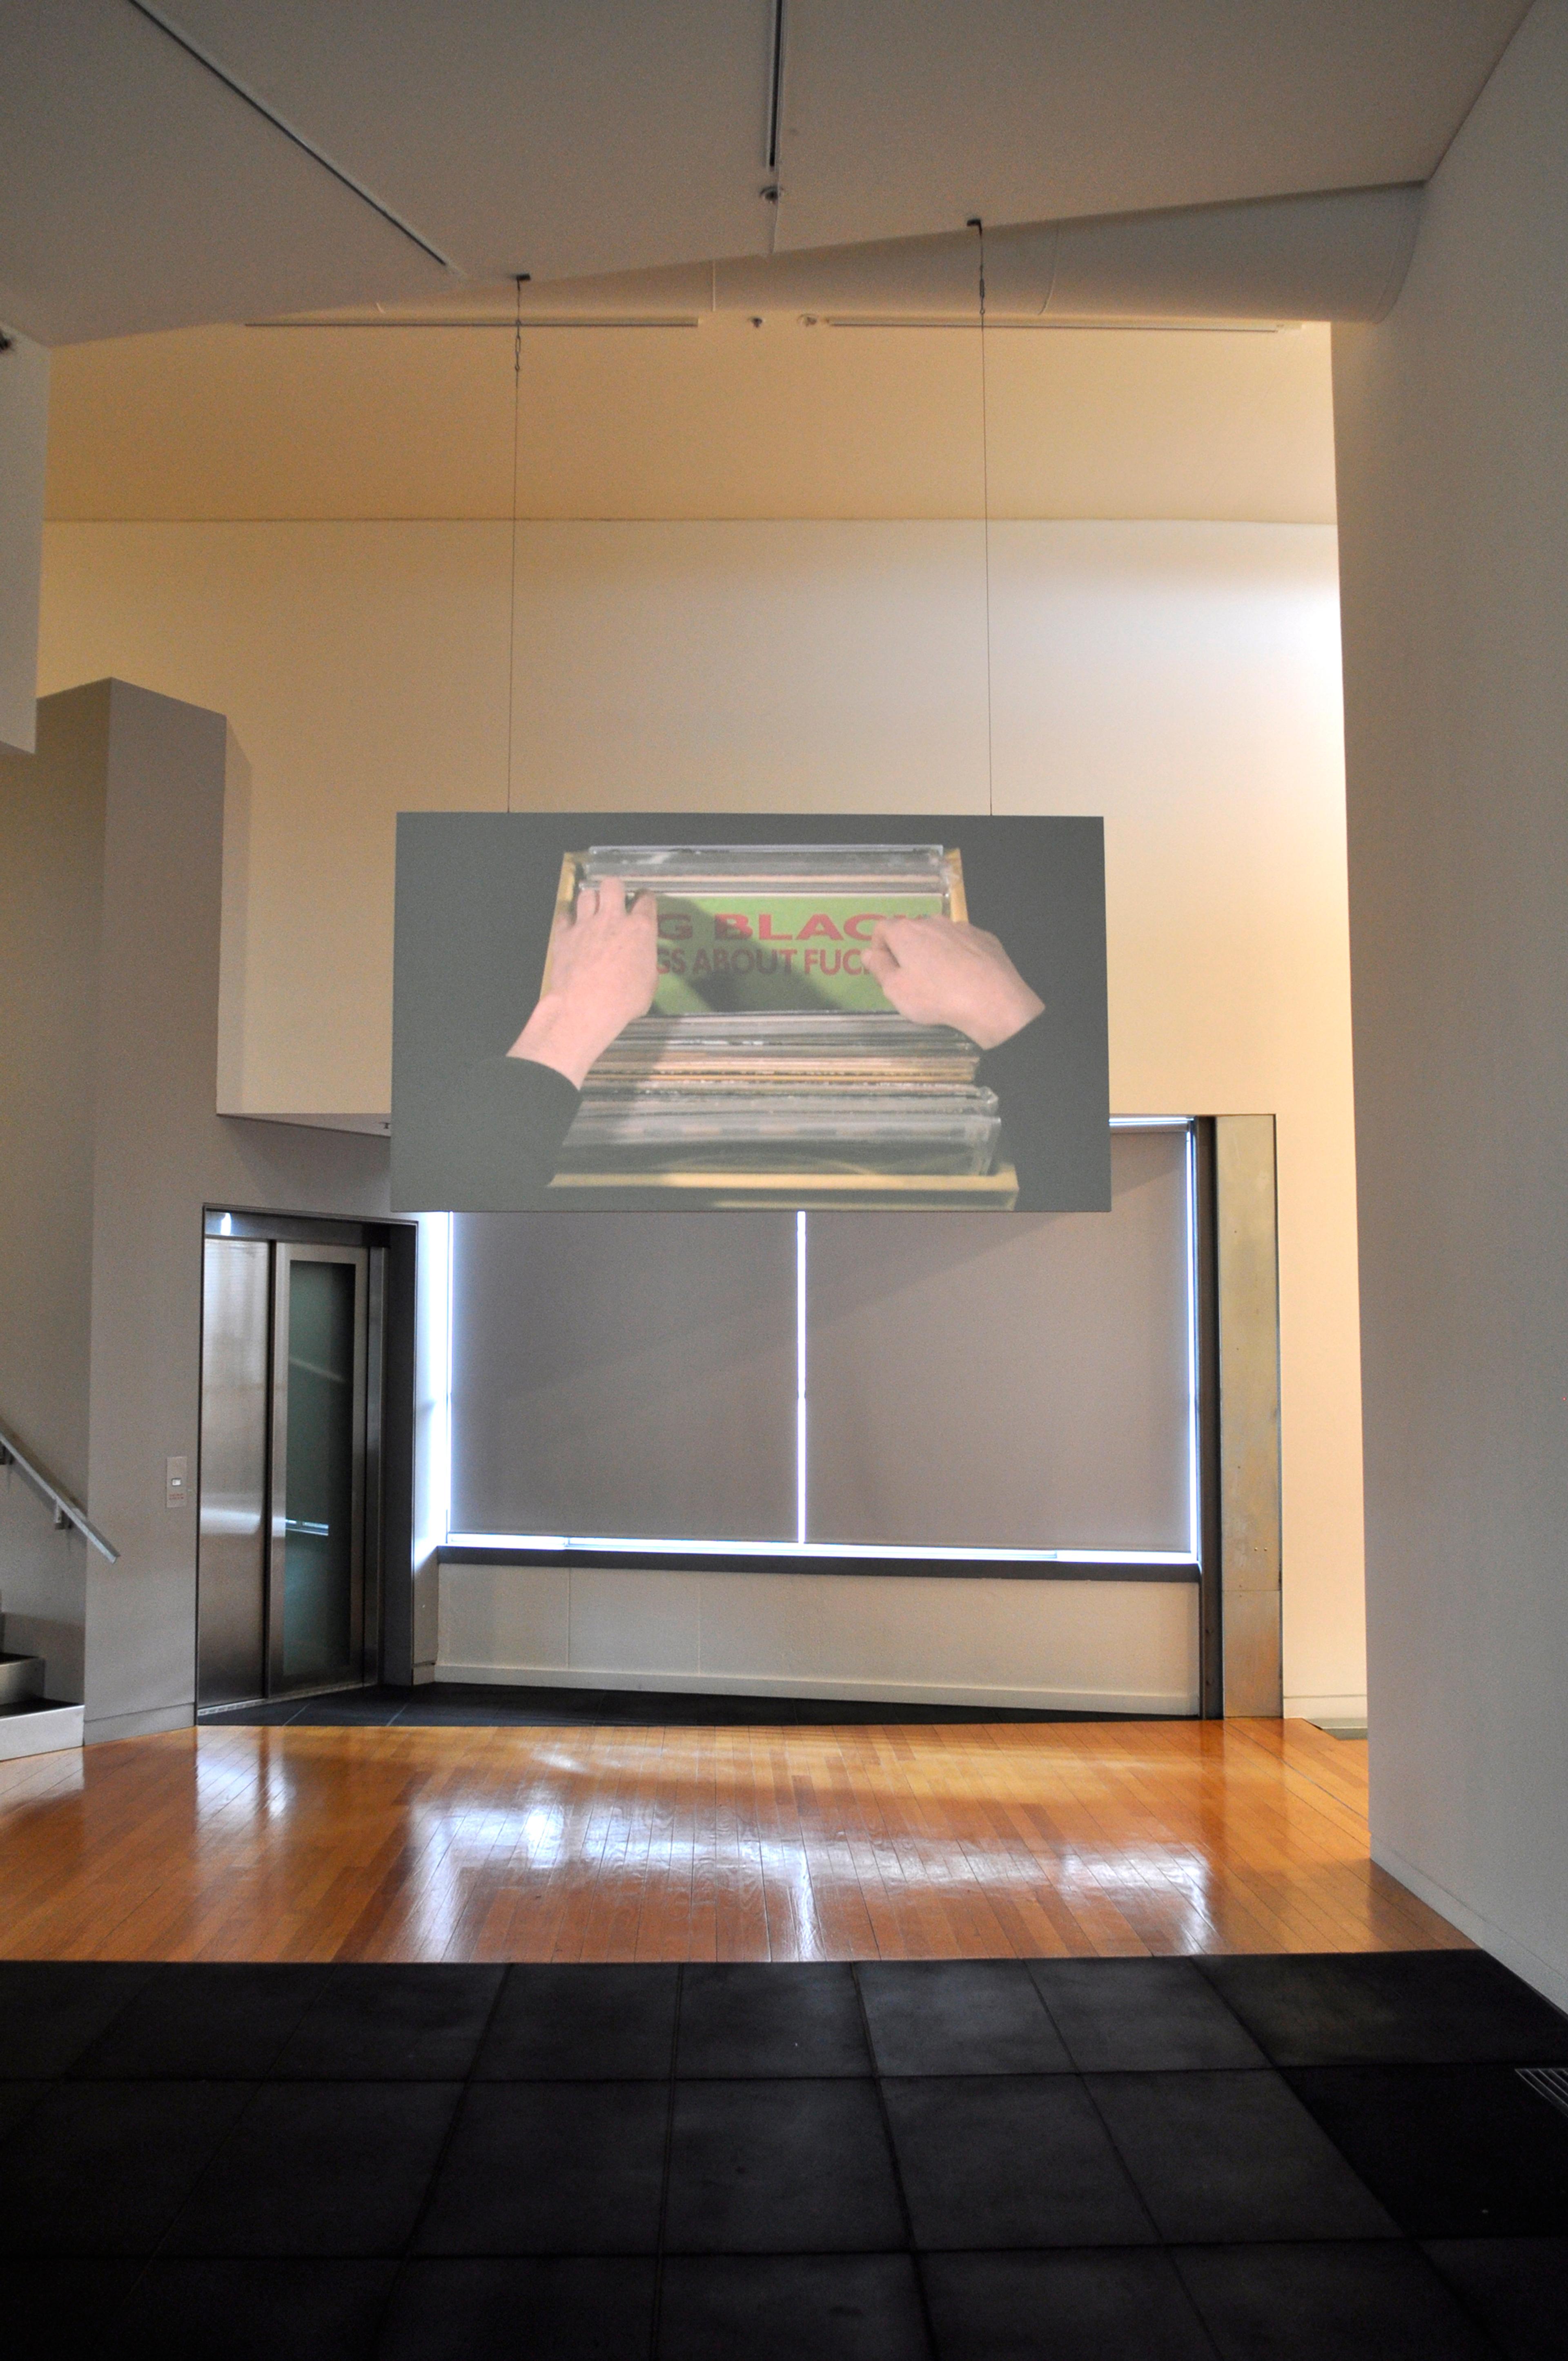 Caroline Johnston, Songs about “PLEASE REMOVE”, 2010. DVD with sound (8' 39" repeated). Installation view, Object Lessons: A Musical Fiction, Adam Art Gallery Te Pātaka Toi, Victoria University of Wellington. Photo: Michael Salmon